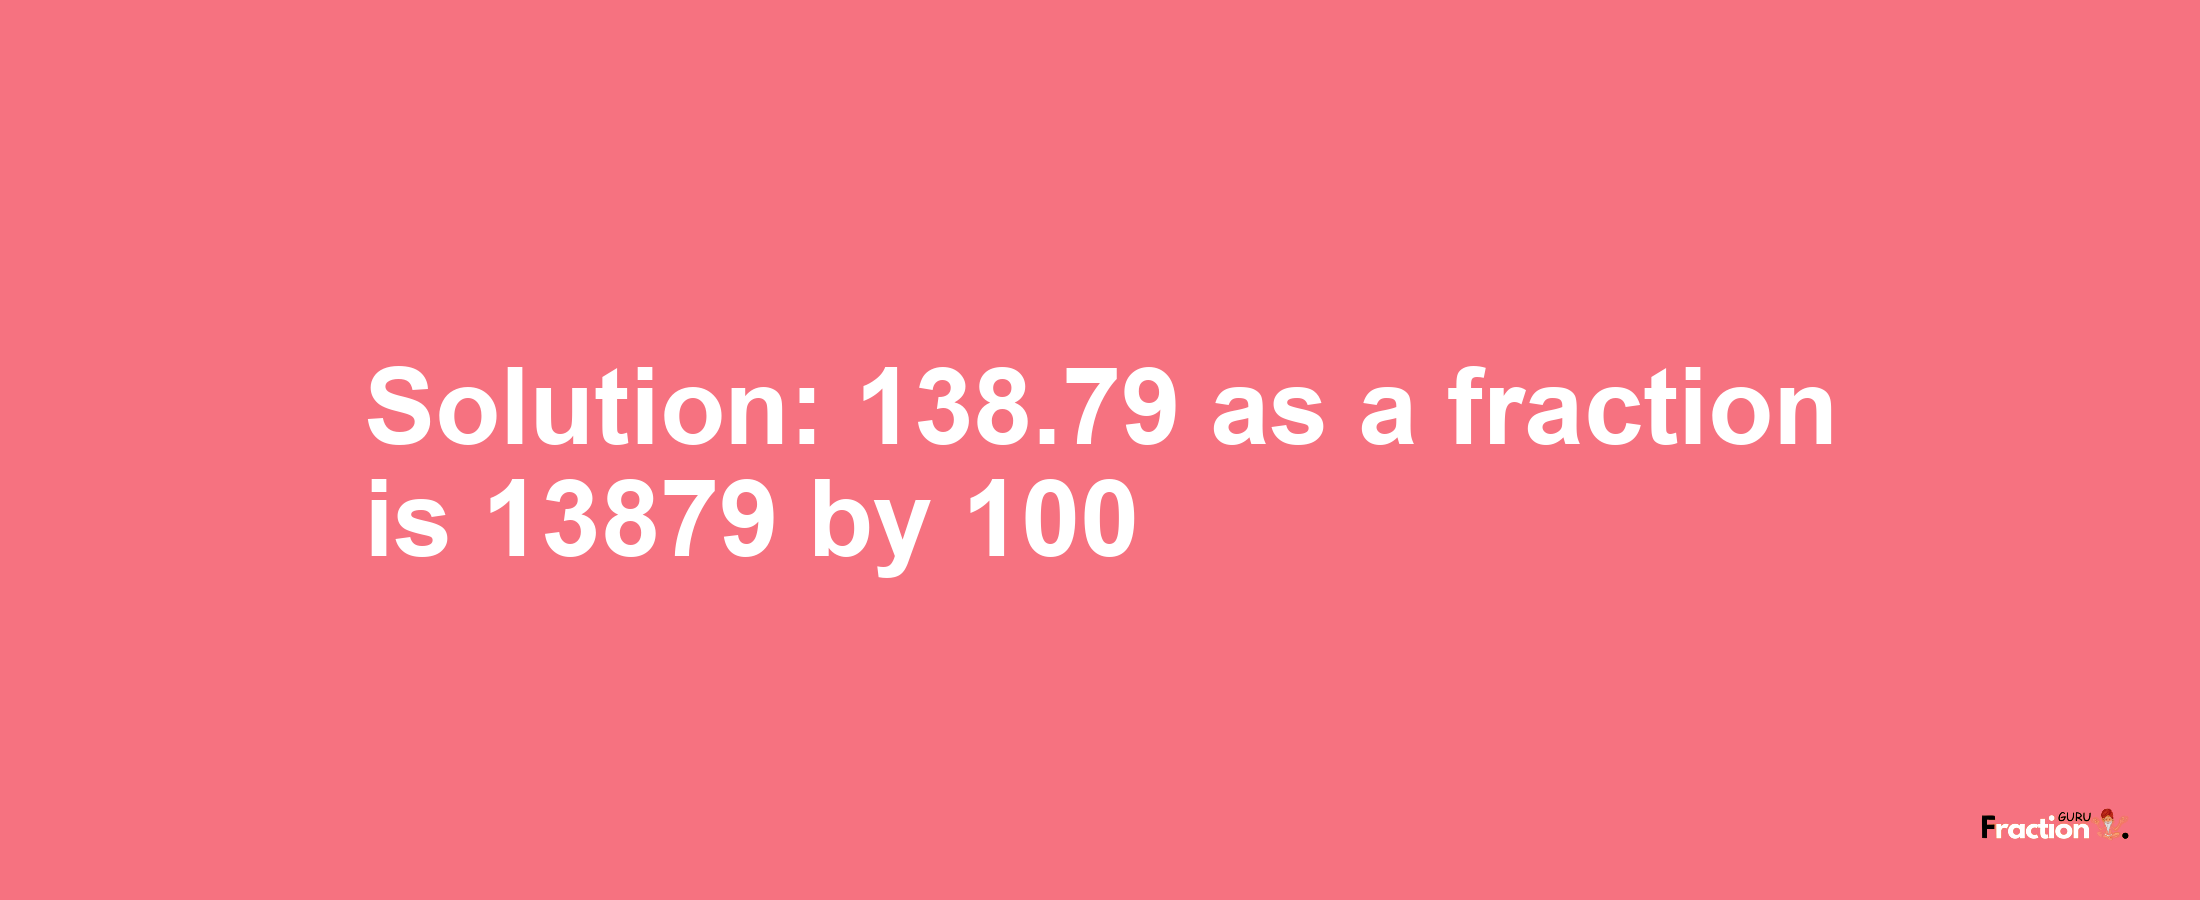 Solution:138.79 as a fraction is 13879/100